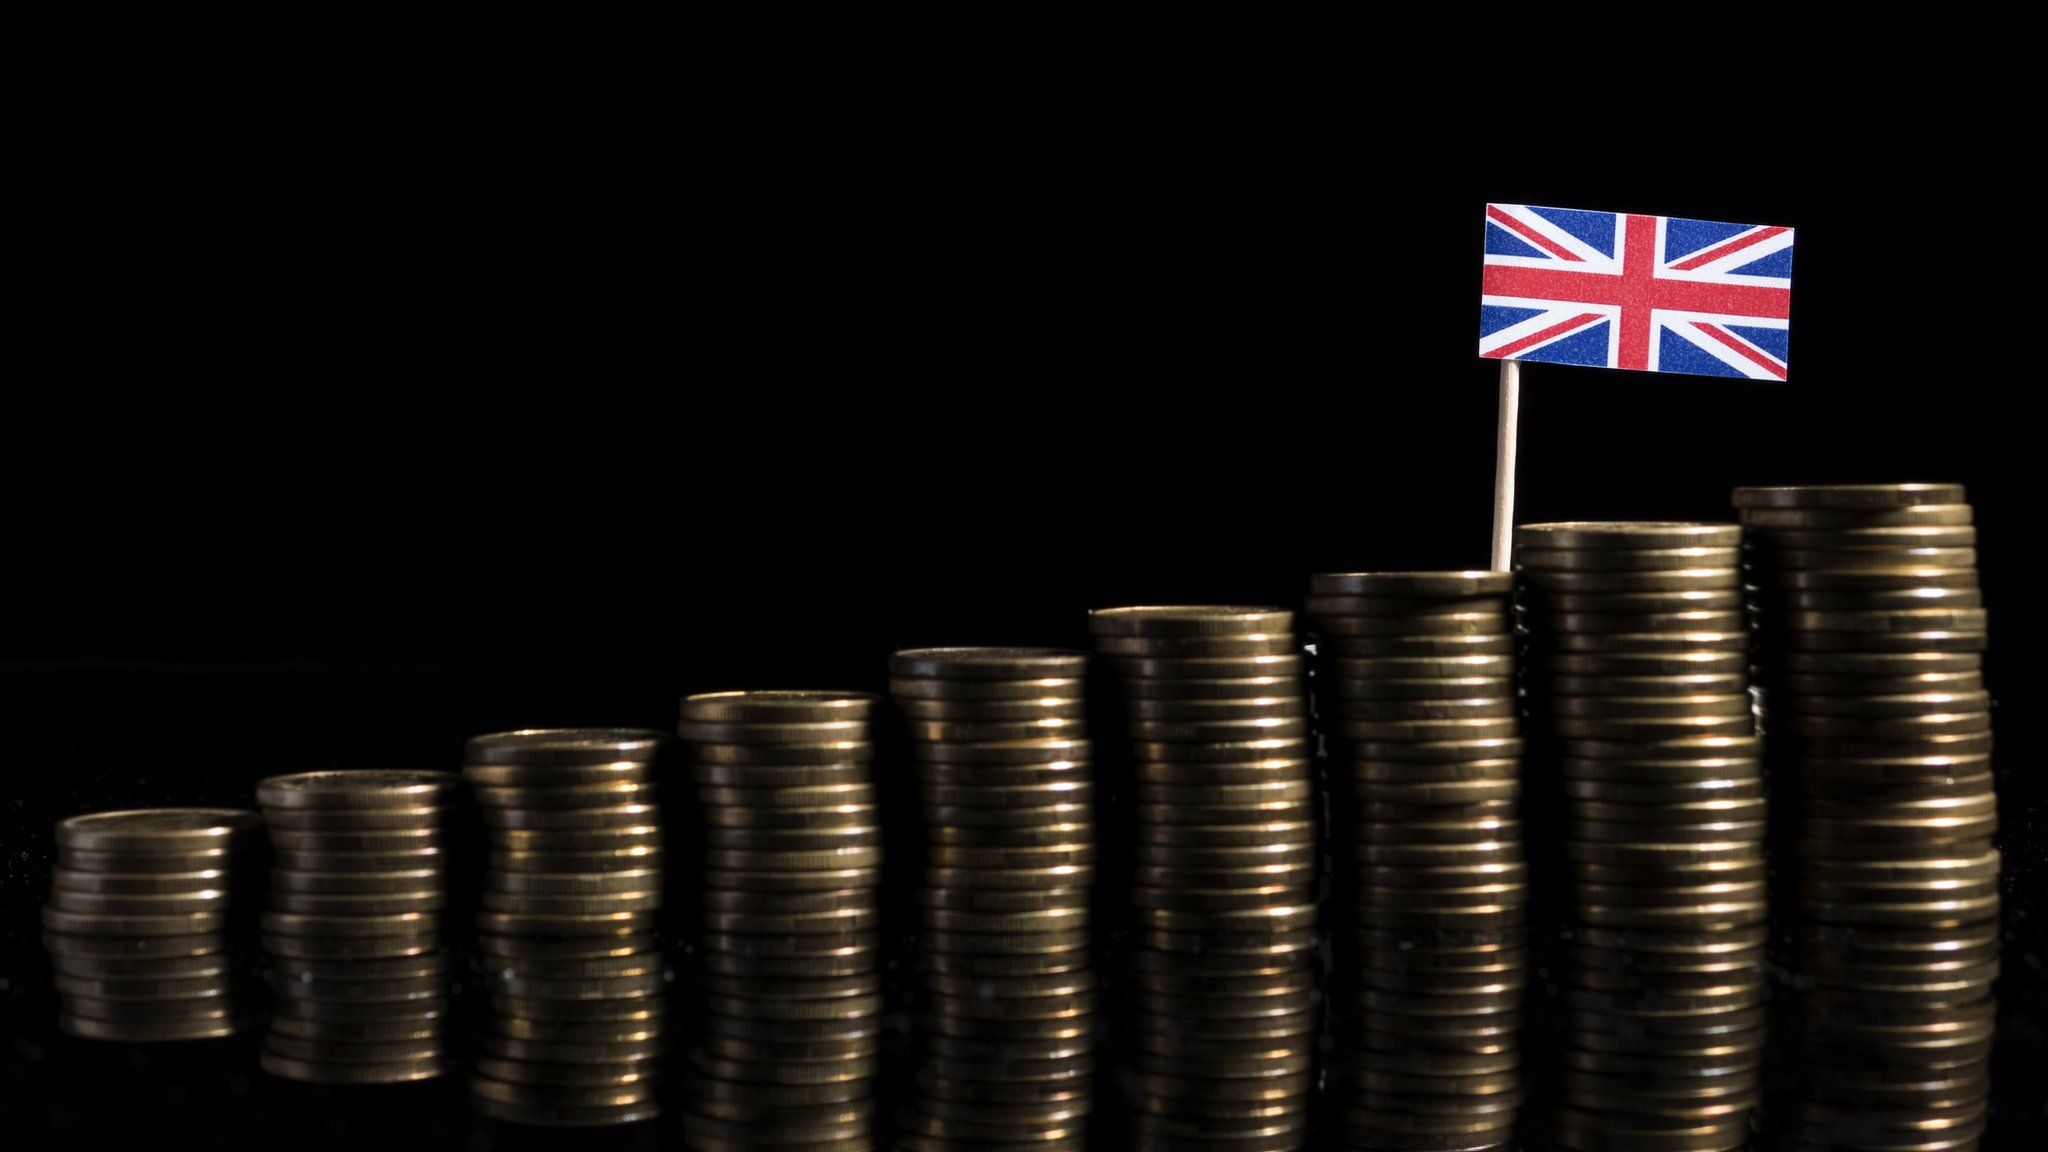 Union Flag on top of coins